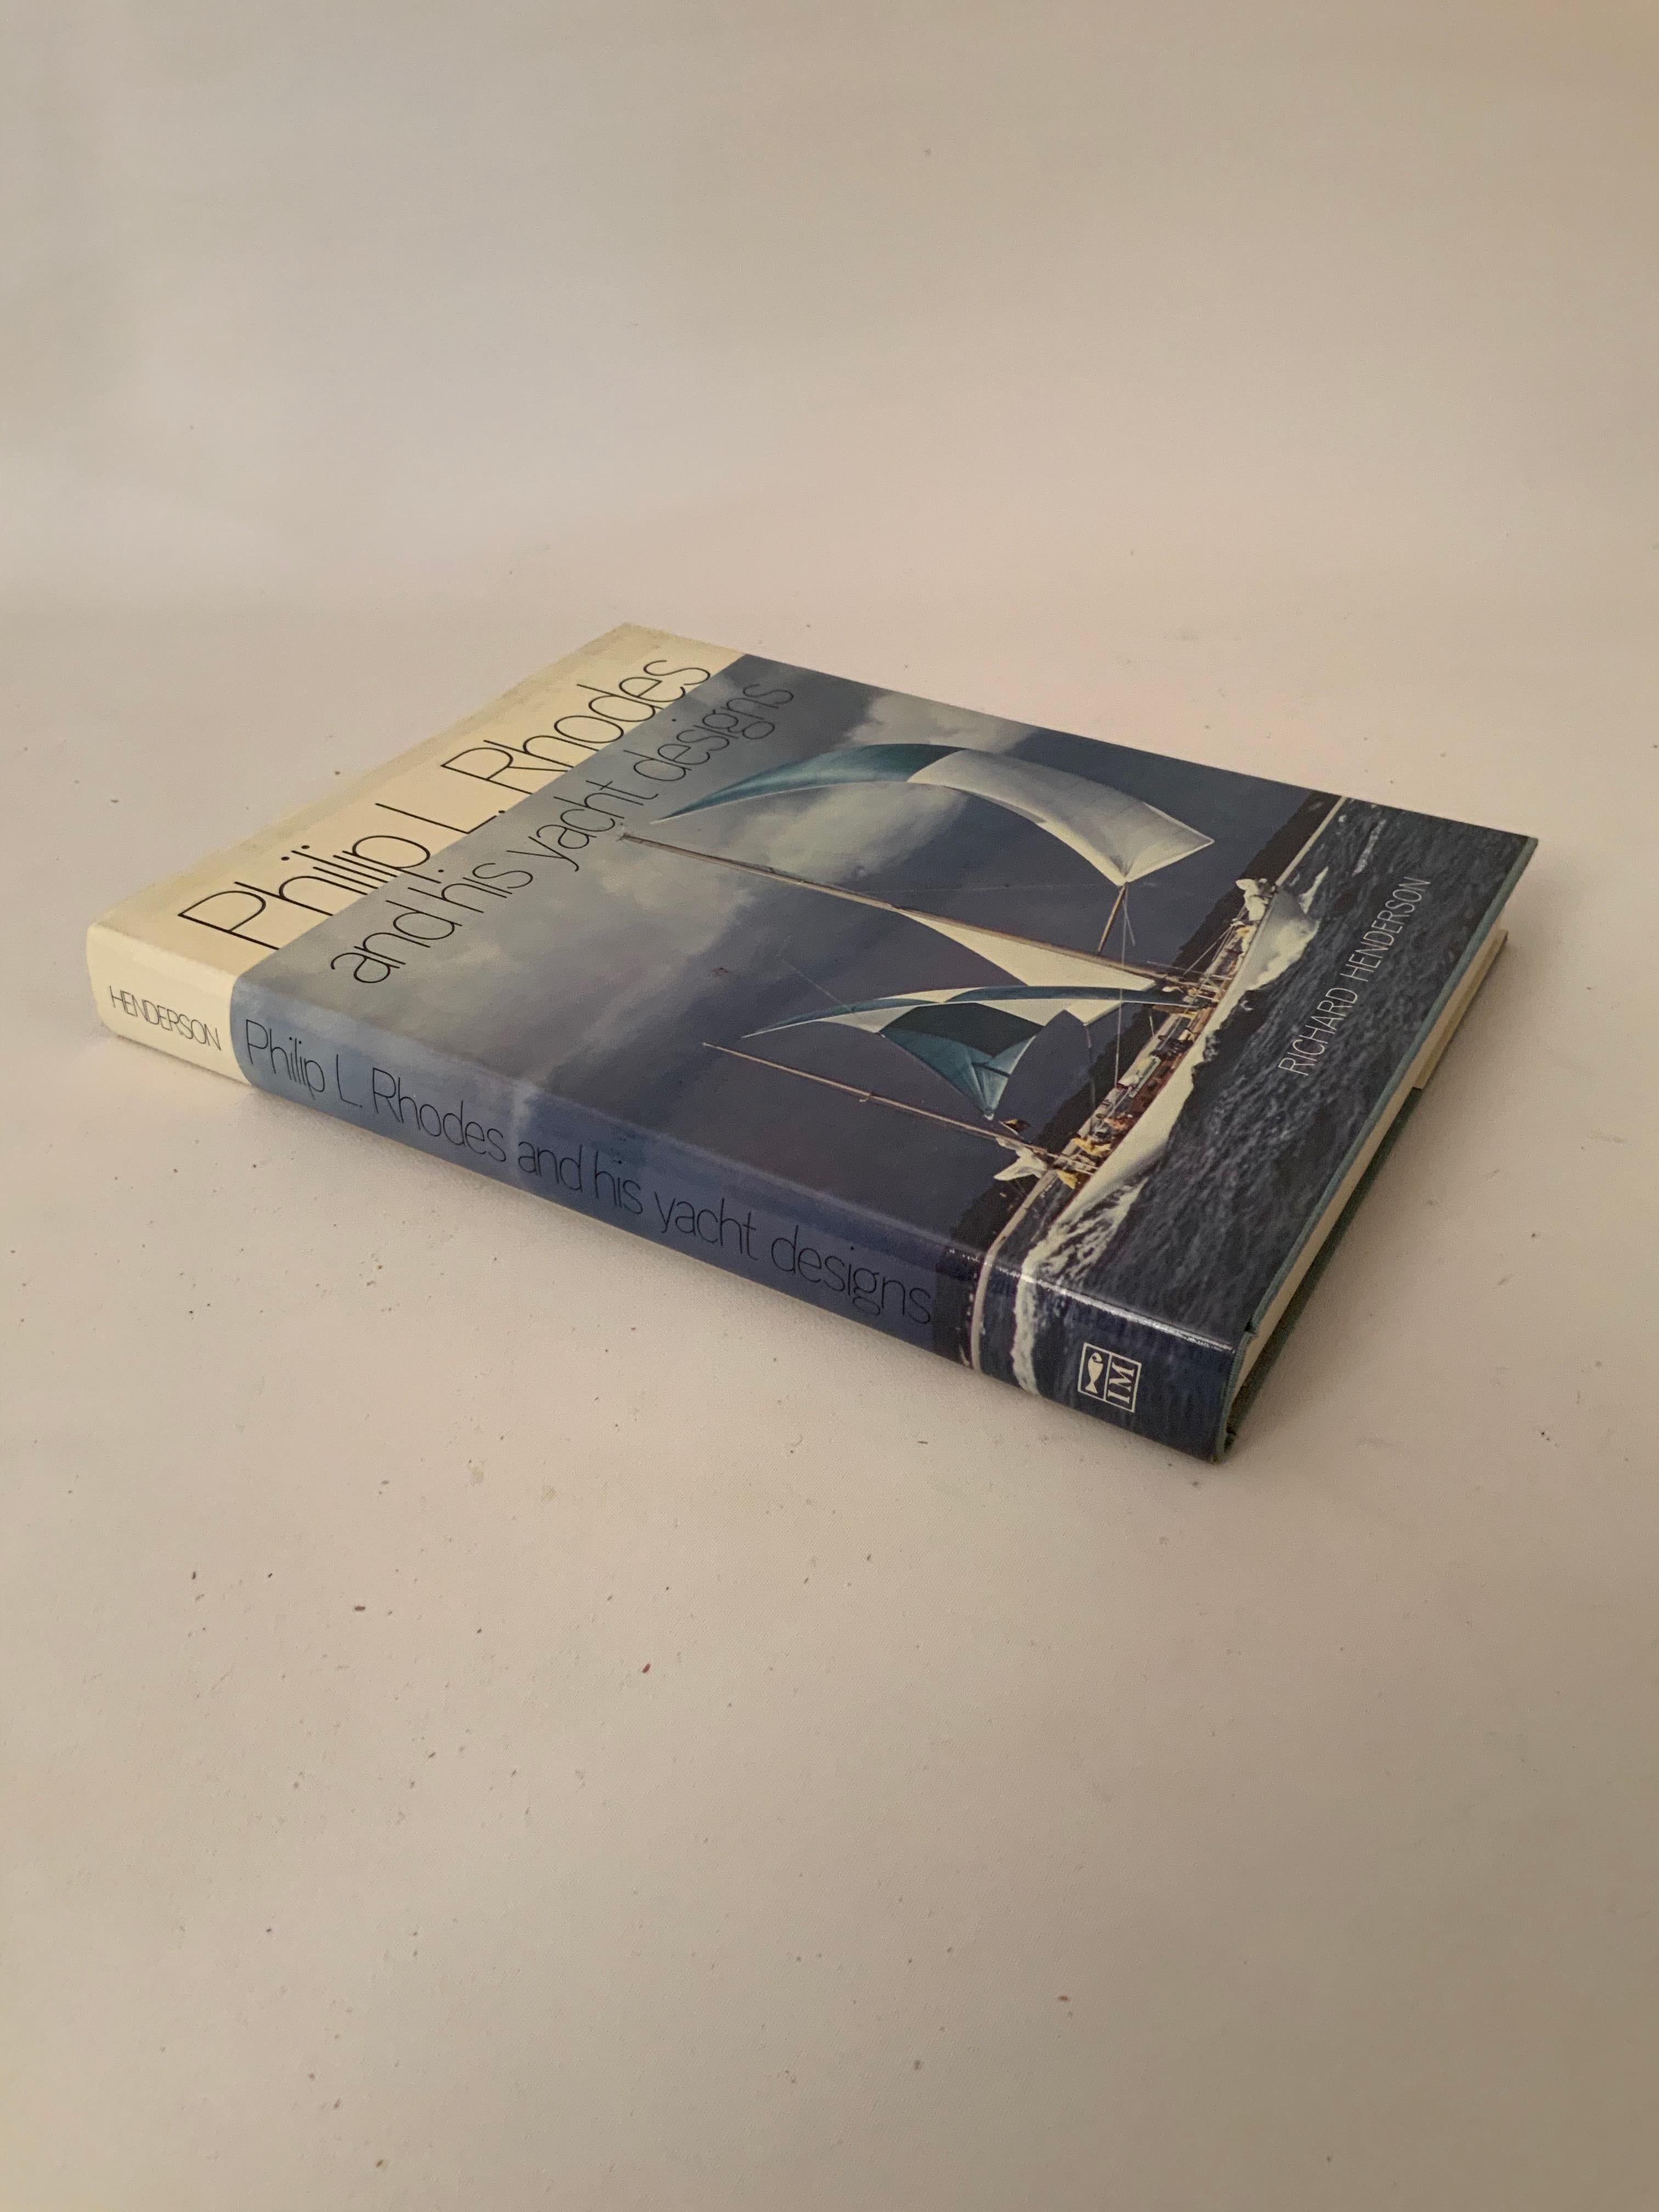 Richard Henderson's comprehensive 405 page hard cover book about Philip Rhodes yacht designs. Copyright 1981. 415 pages with index. The books features an extensive biography, photos and line drawings of these nautical masterpieces. Dust cover. It